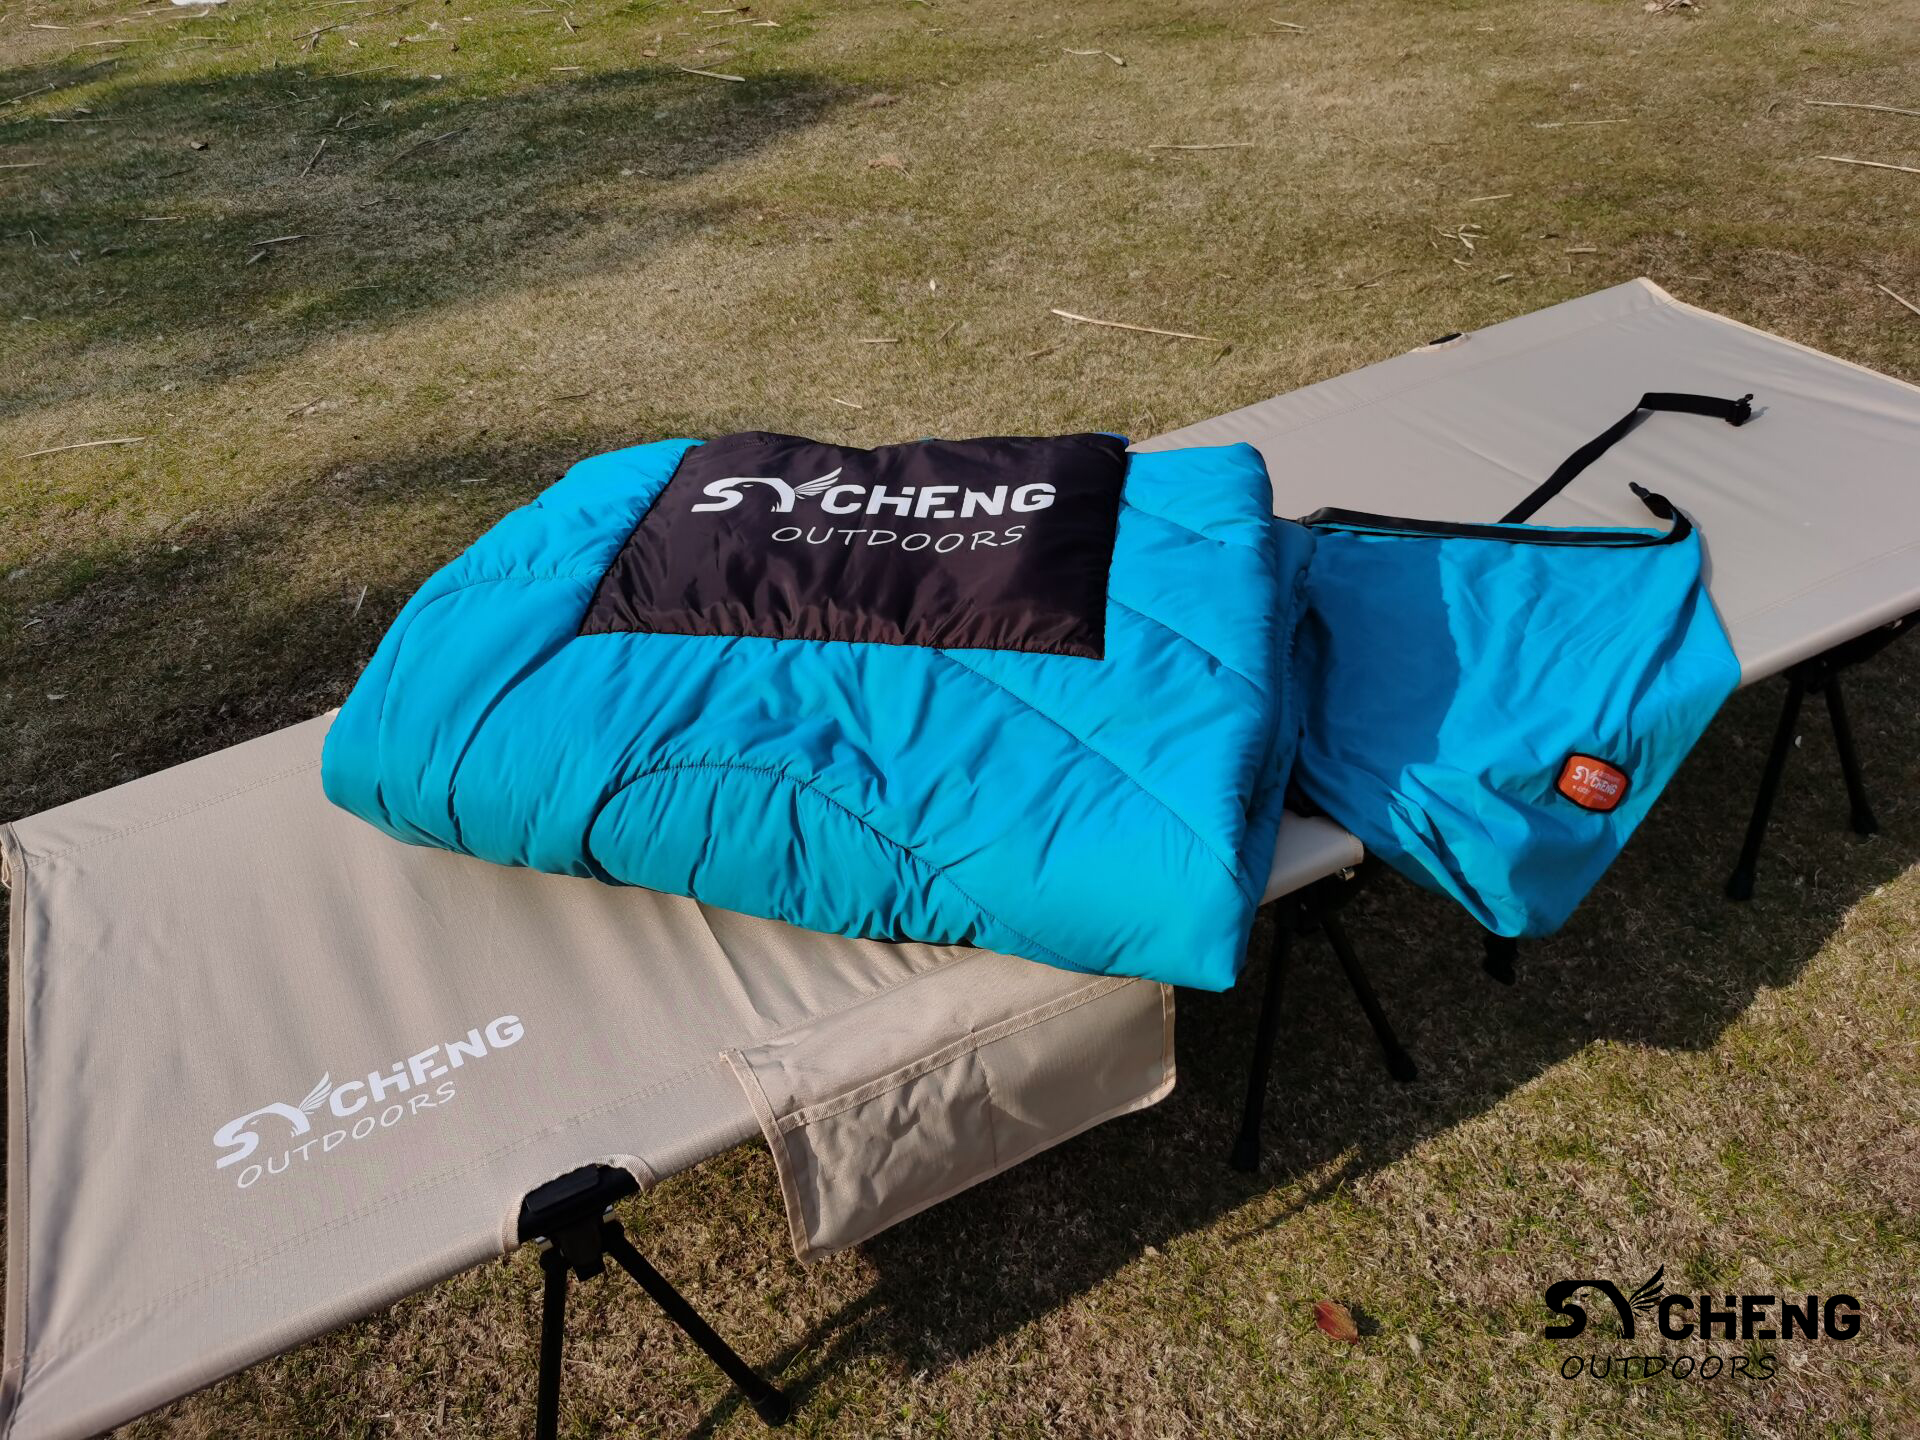 SYCHENG Multifunctional Camping Blanket - Packable & Waterproof Warm Camping Quilt - Outdoor Blanket for Stadium, Backpacking, Camping, Travel, and Hiking 